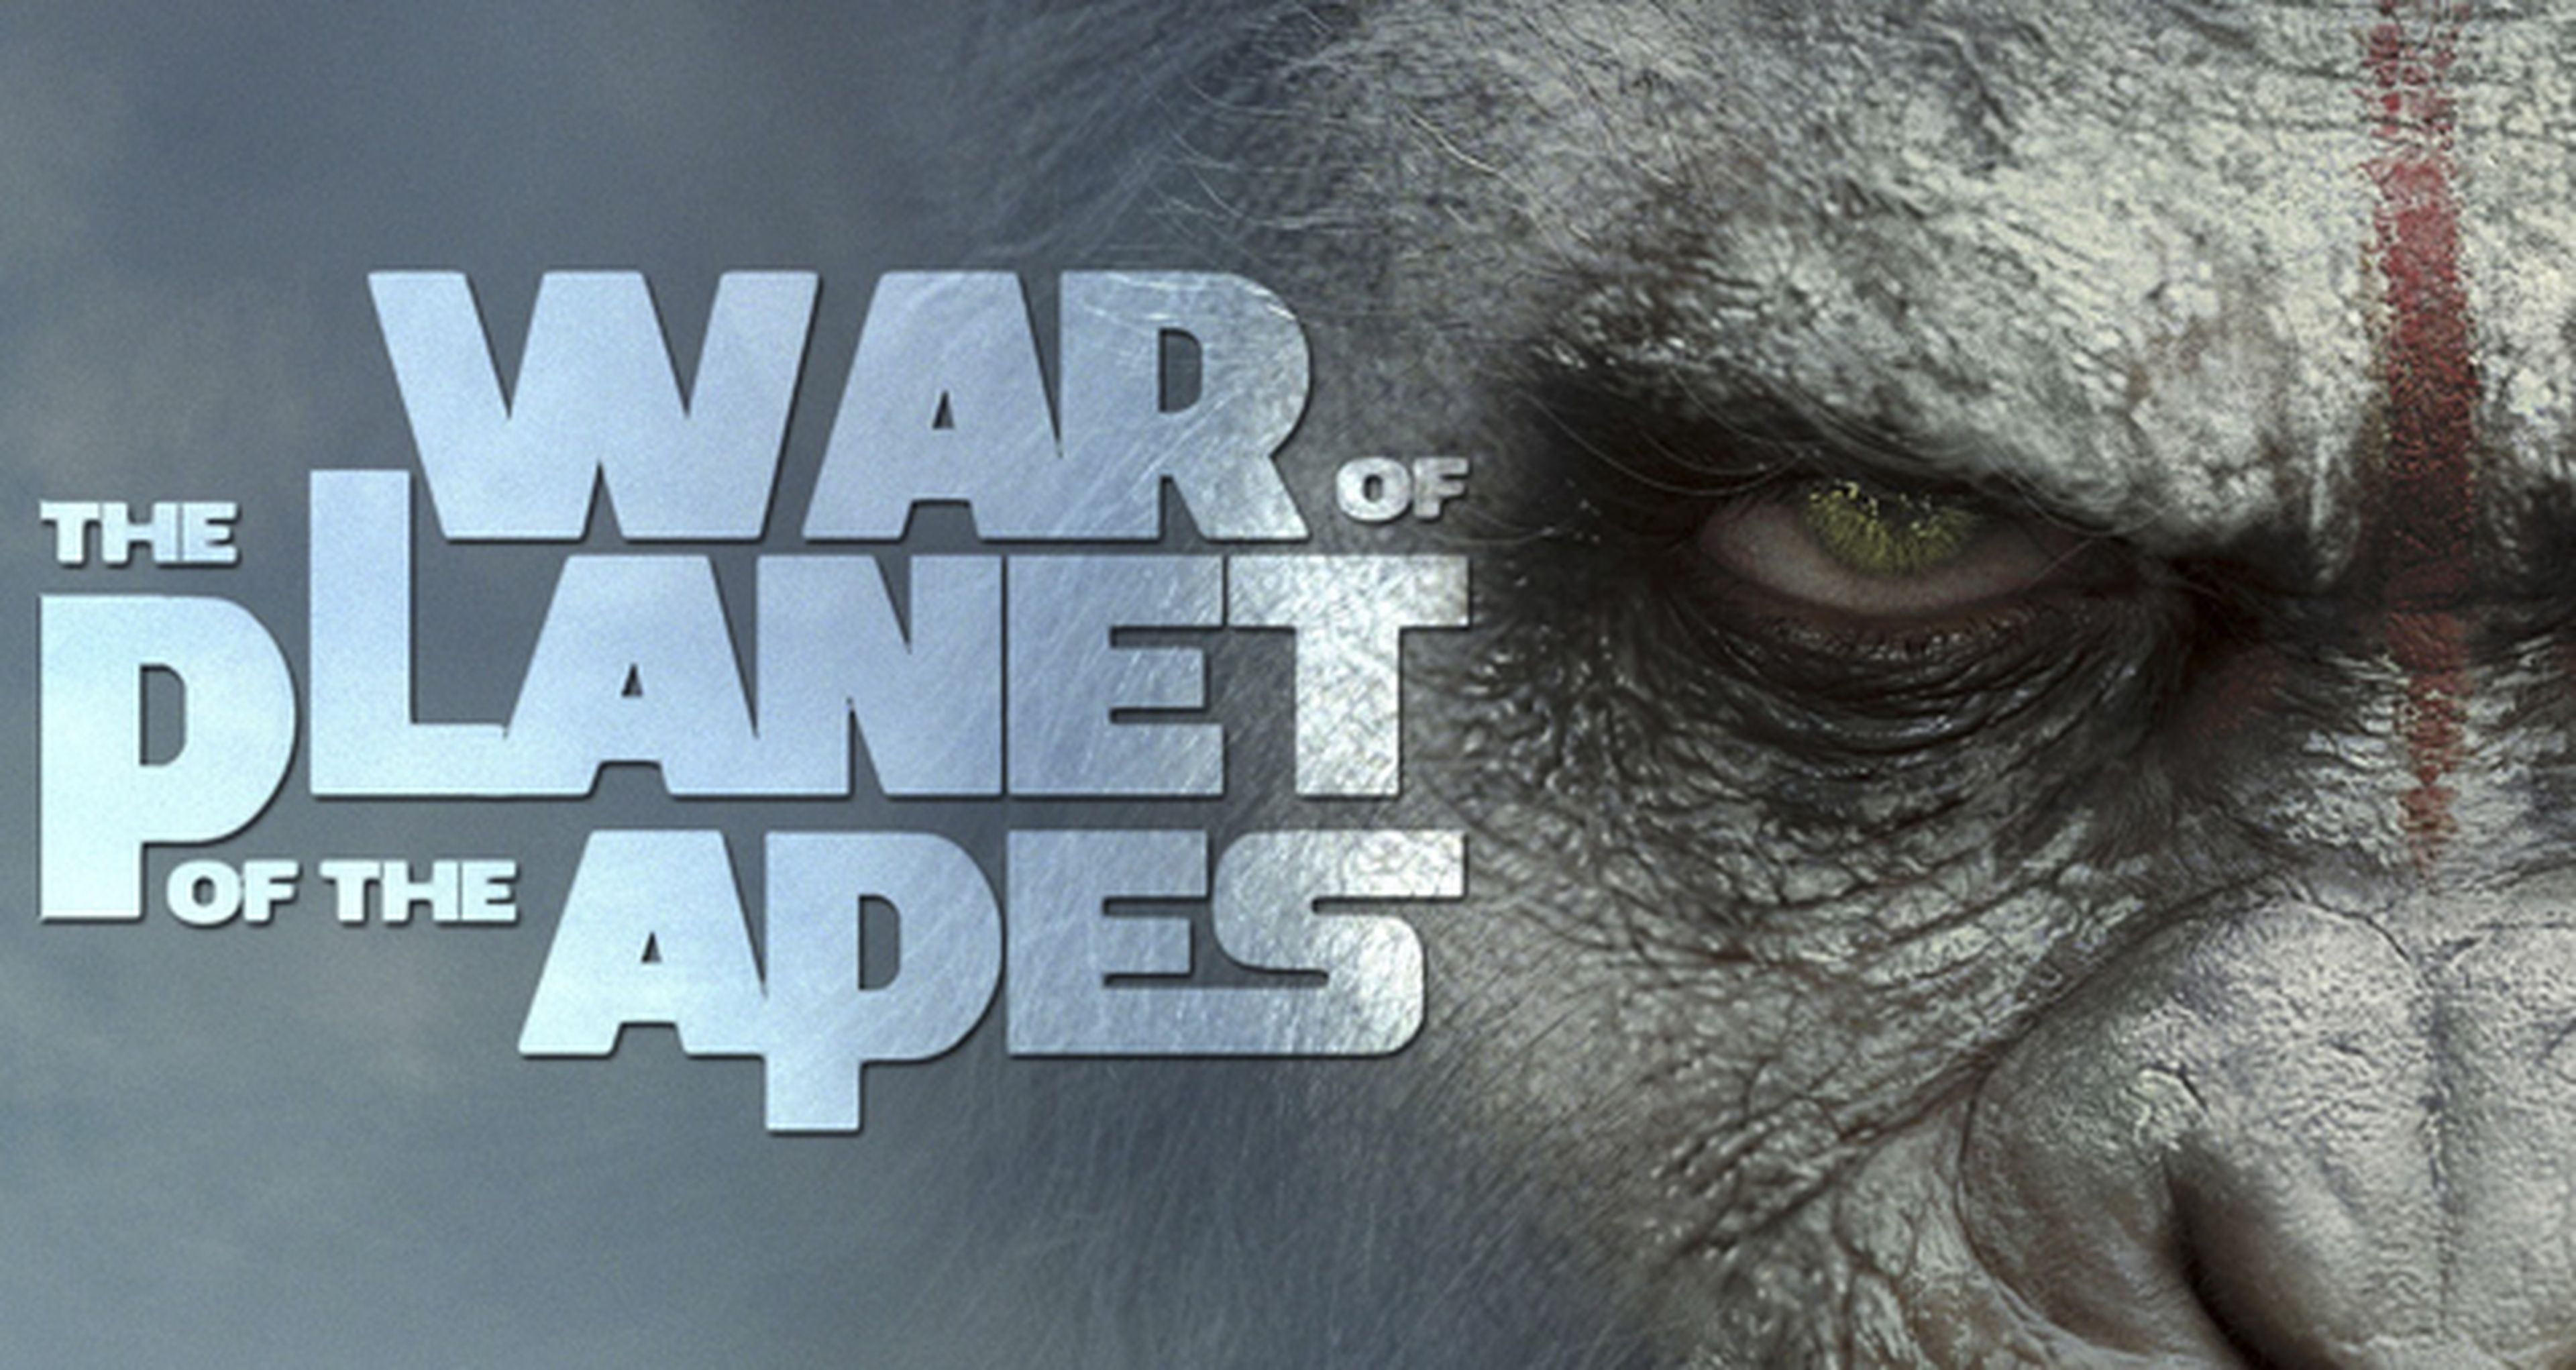 War of the Planet of the Apes ficha a Woody Harrelson como villano